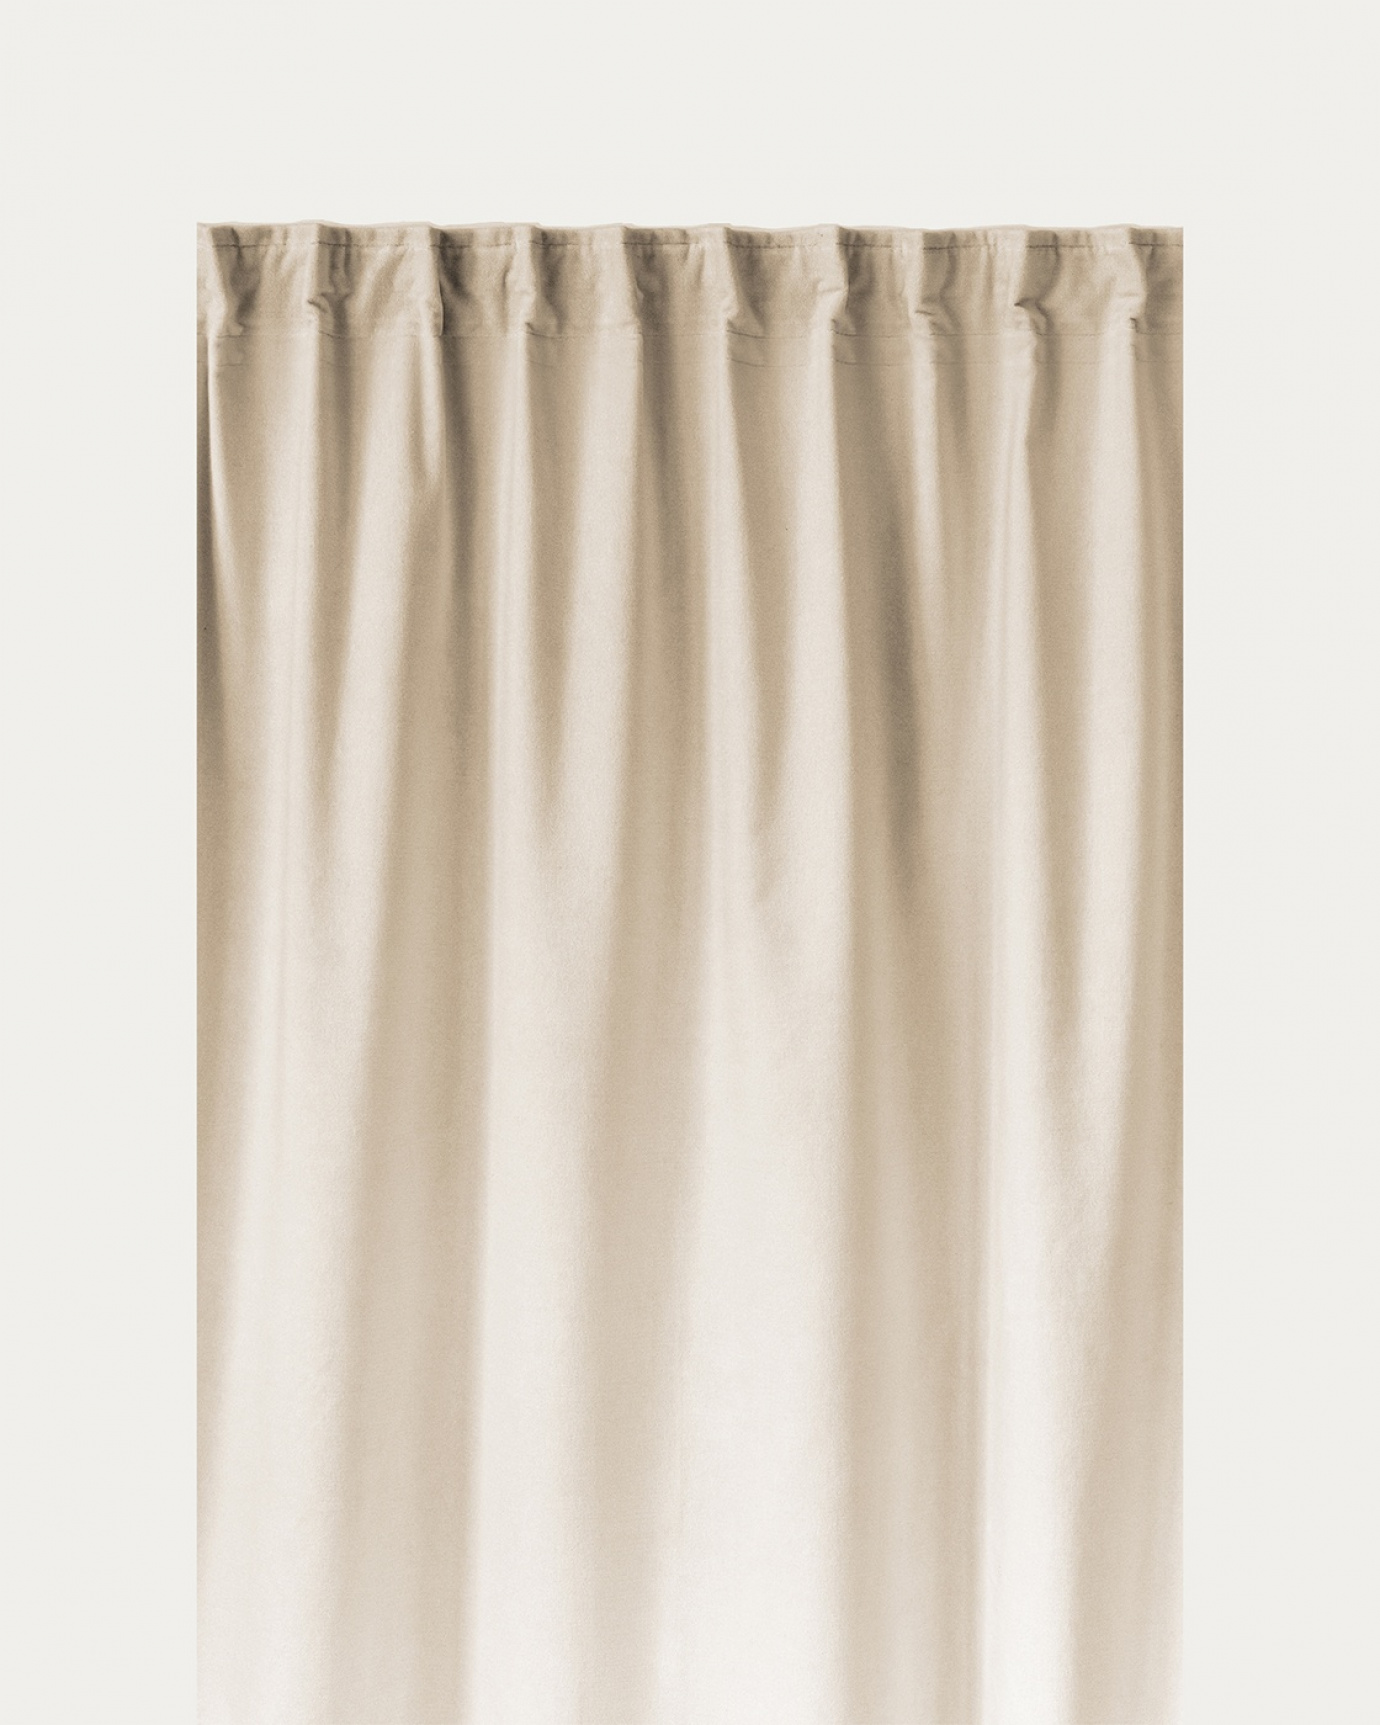 Product image creamy beige PAOLO curtain made of cotton velvet with finished pleat tape from LINUM DESIGN. Size 135x290 cm and sold in 2-pack.